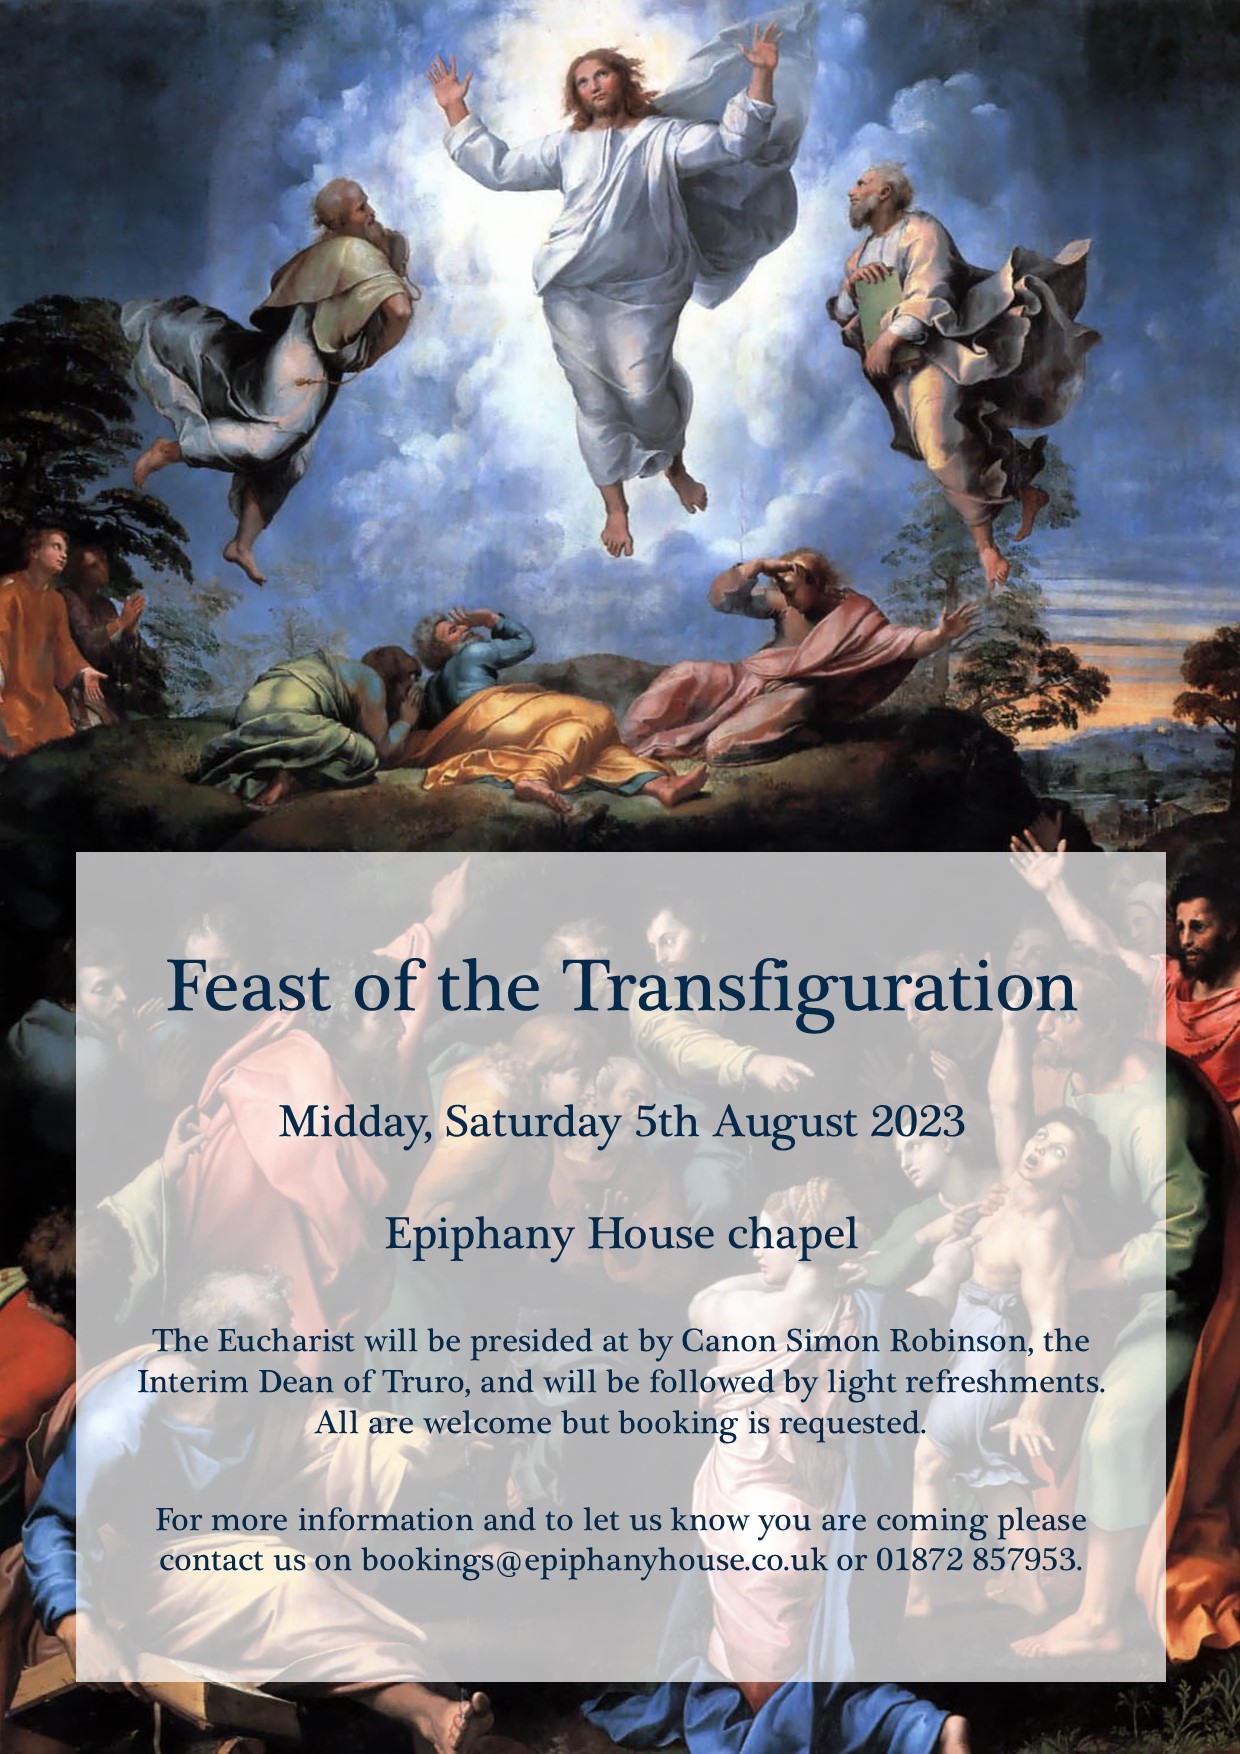 Feast of the Transfiguration Epiphany House